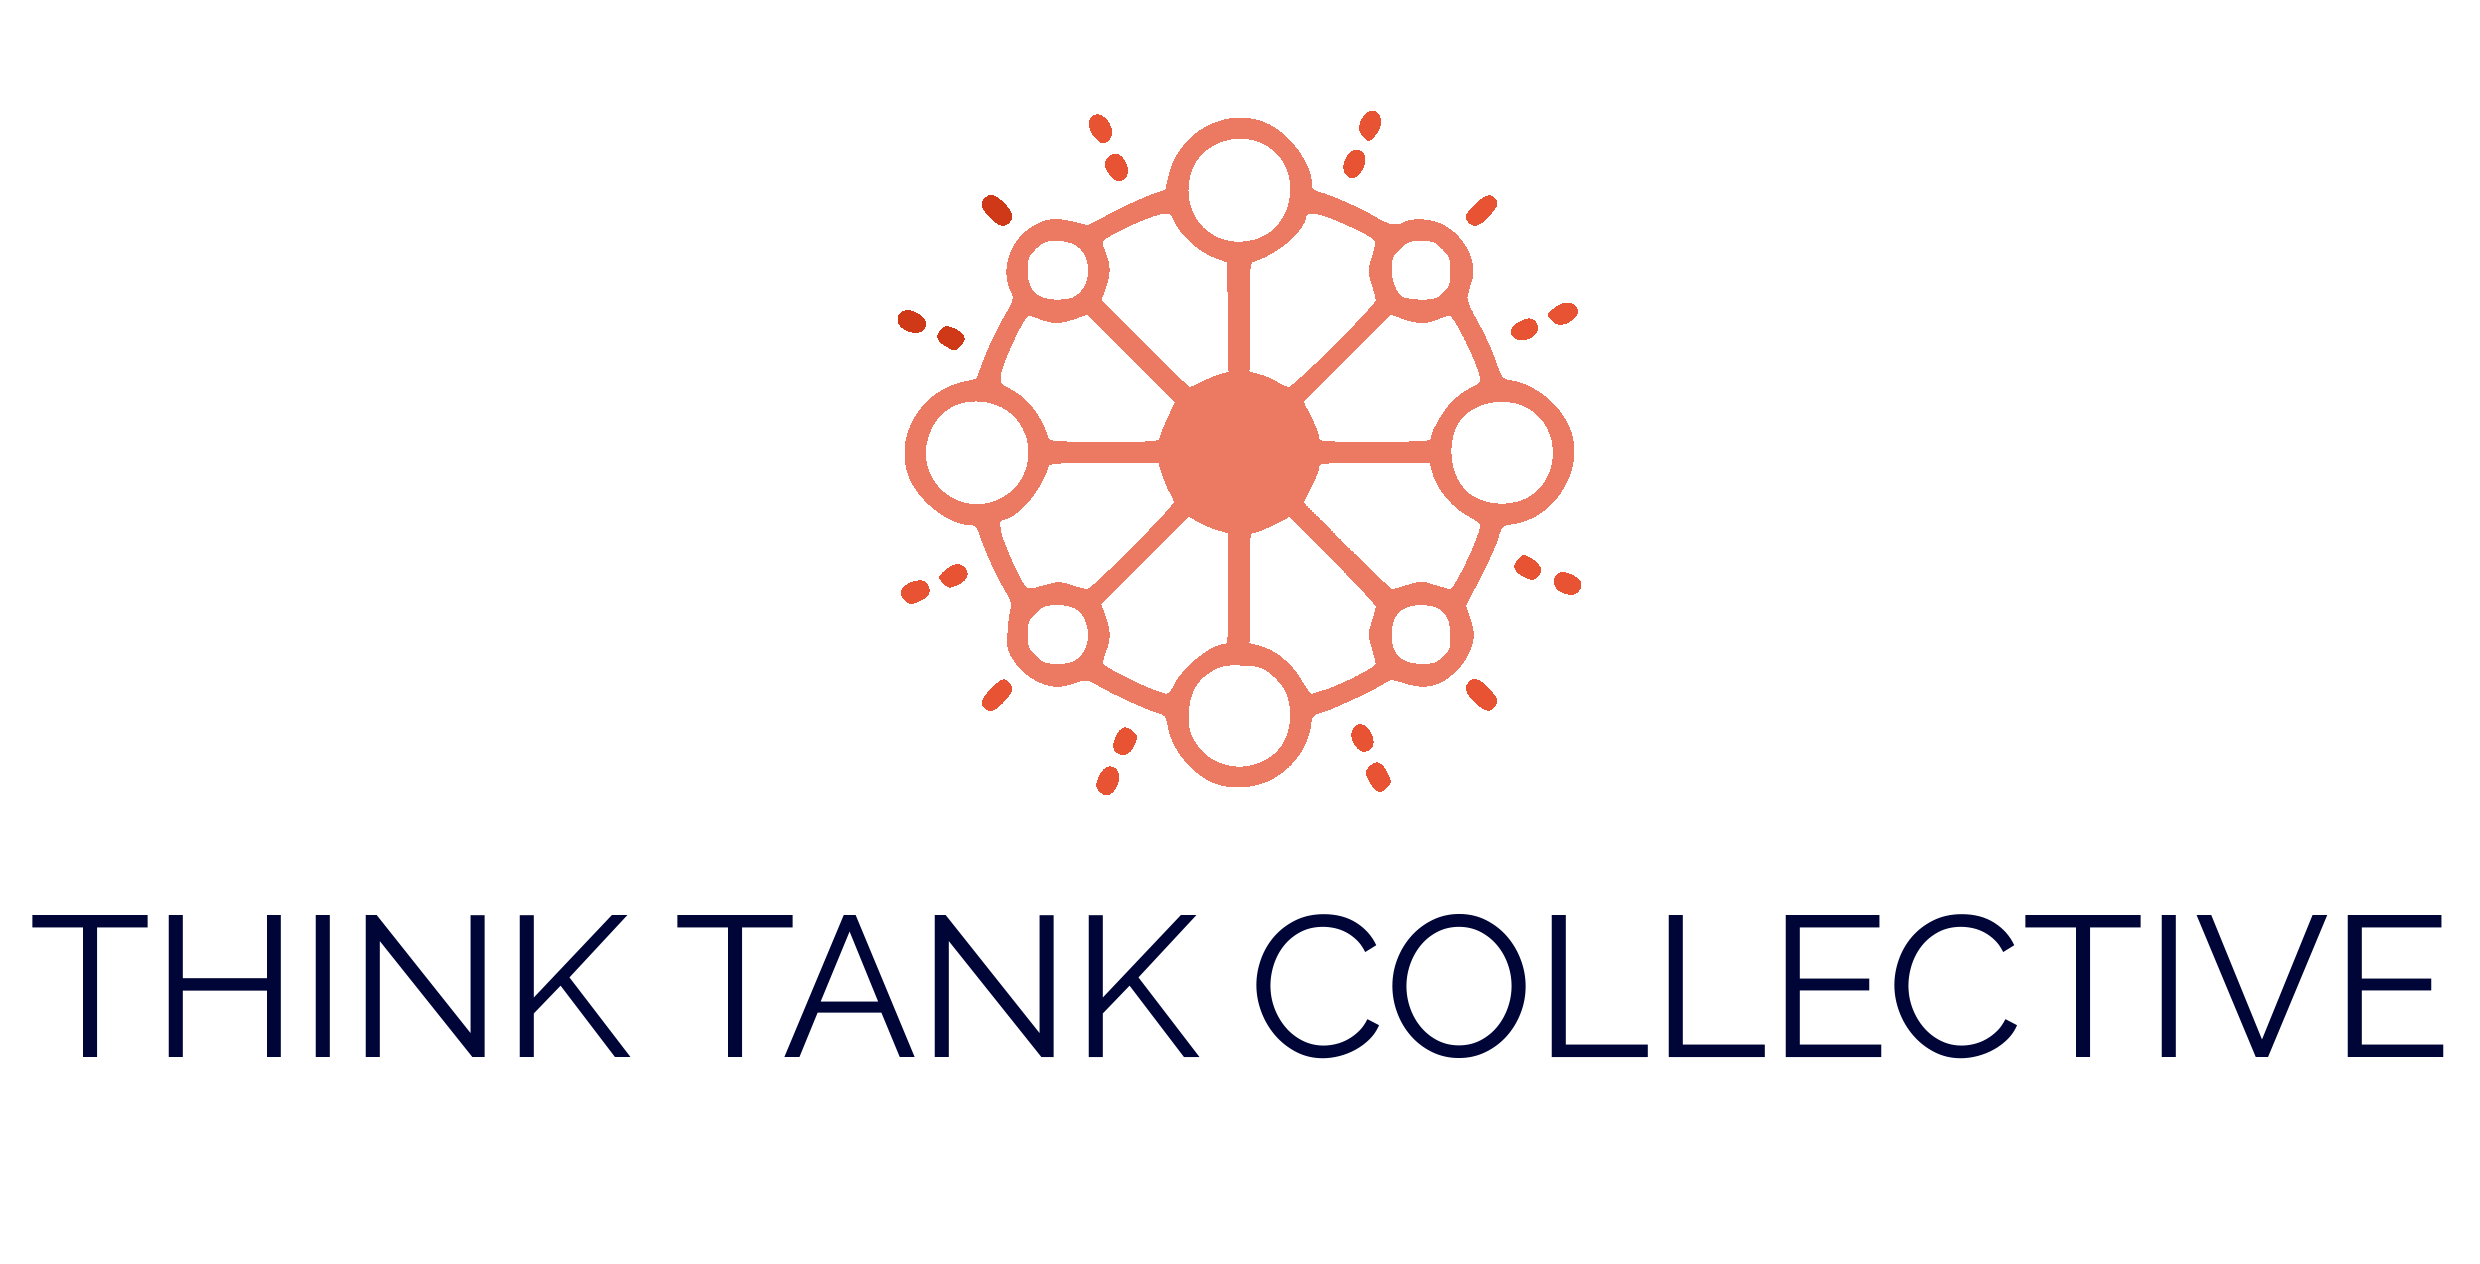 The Think Tank Collective